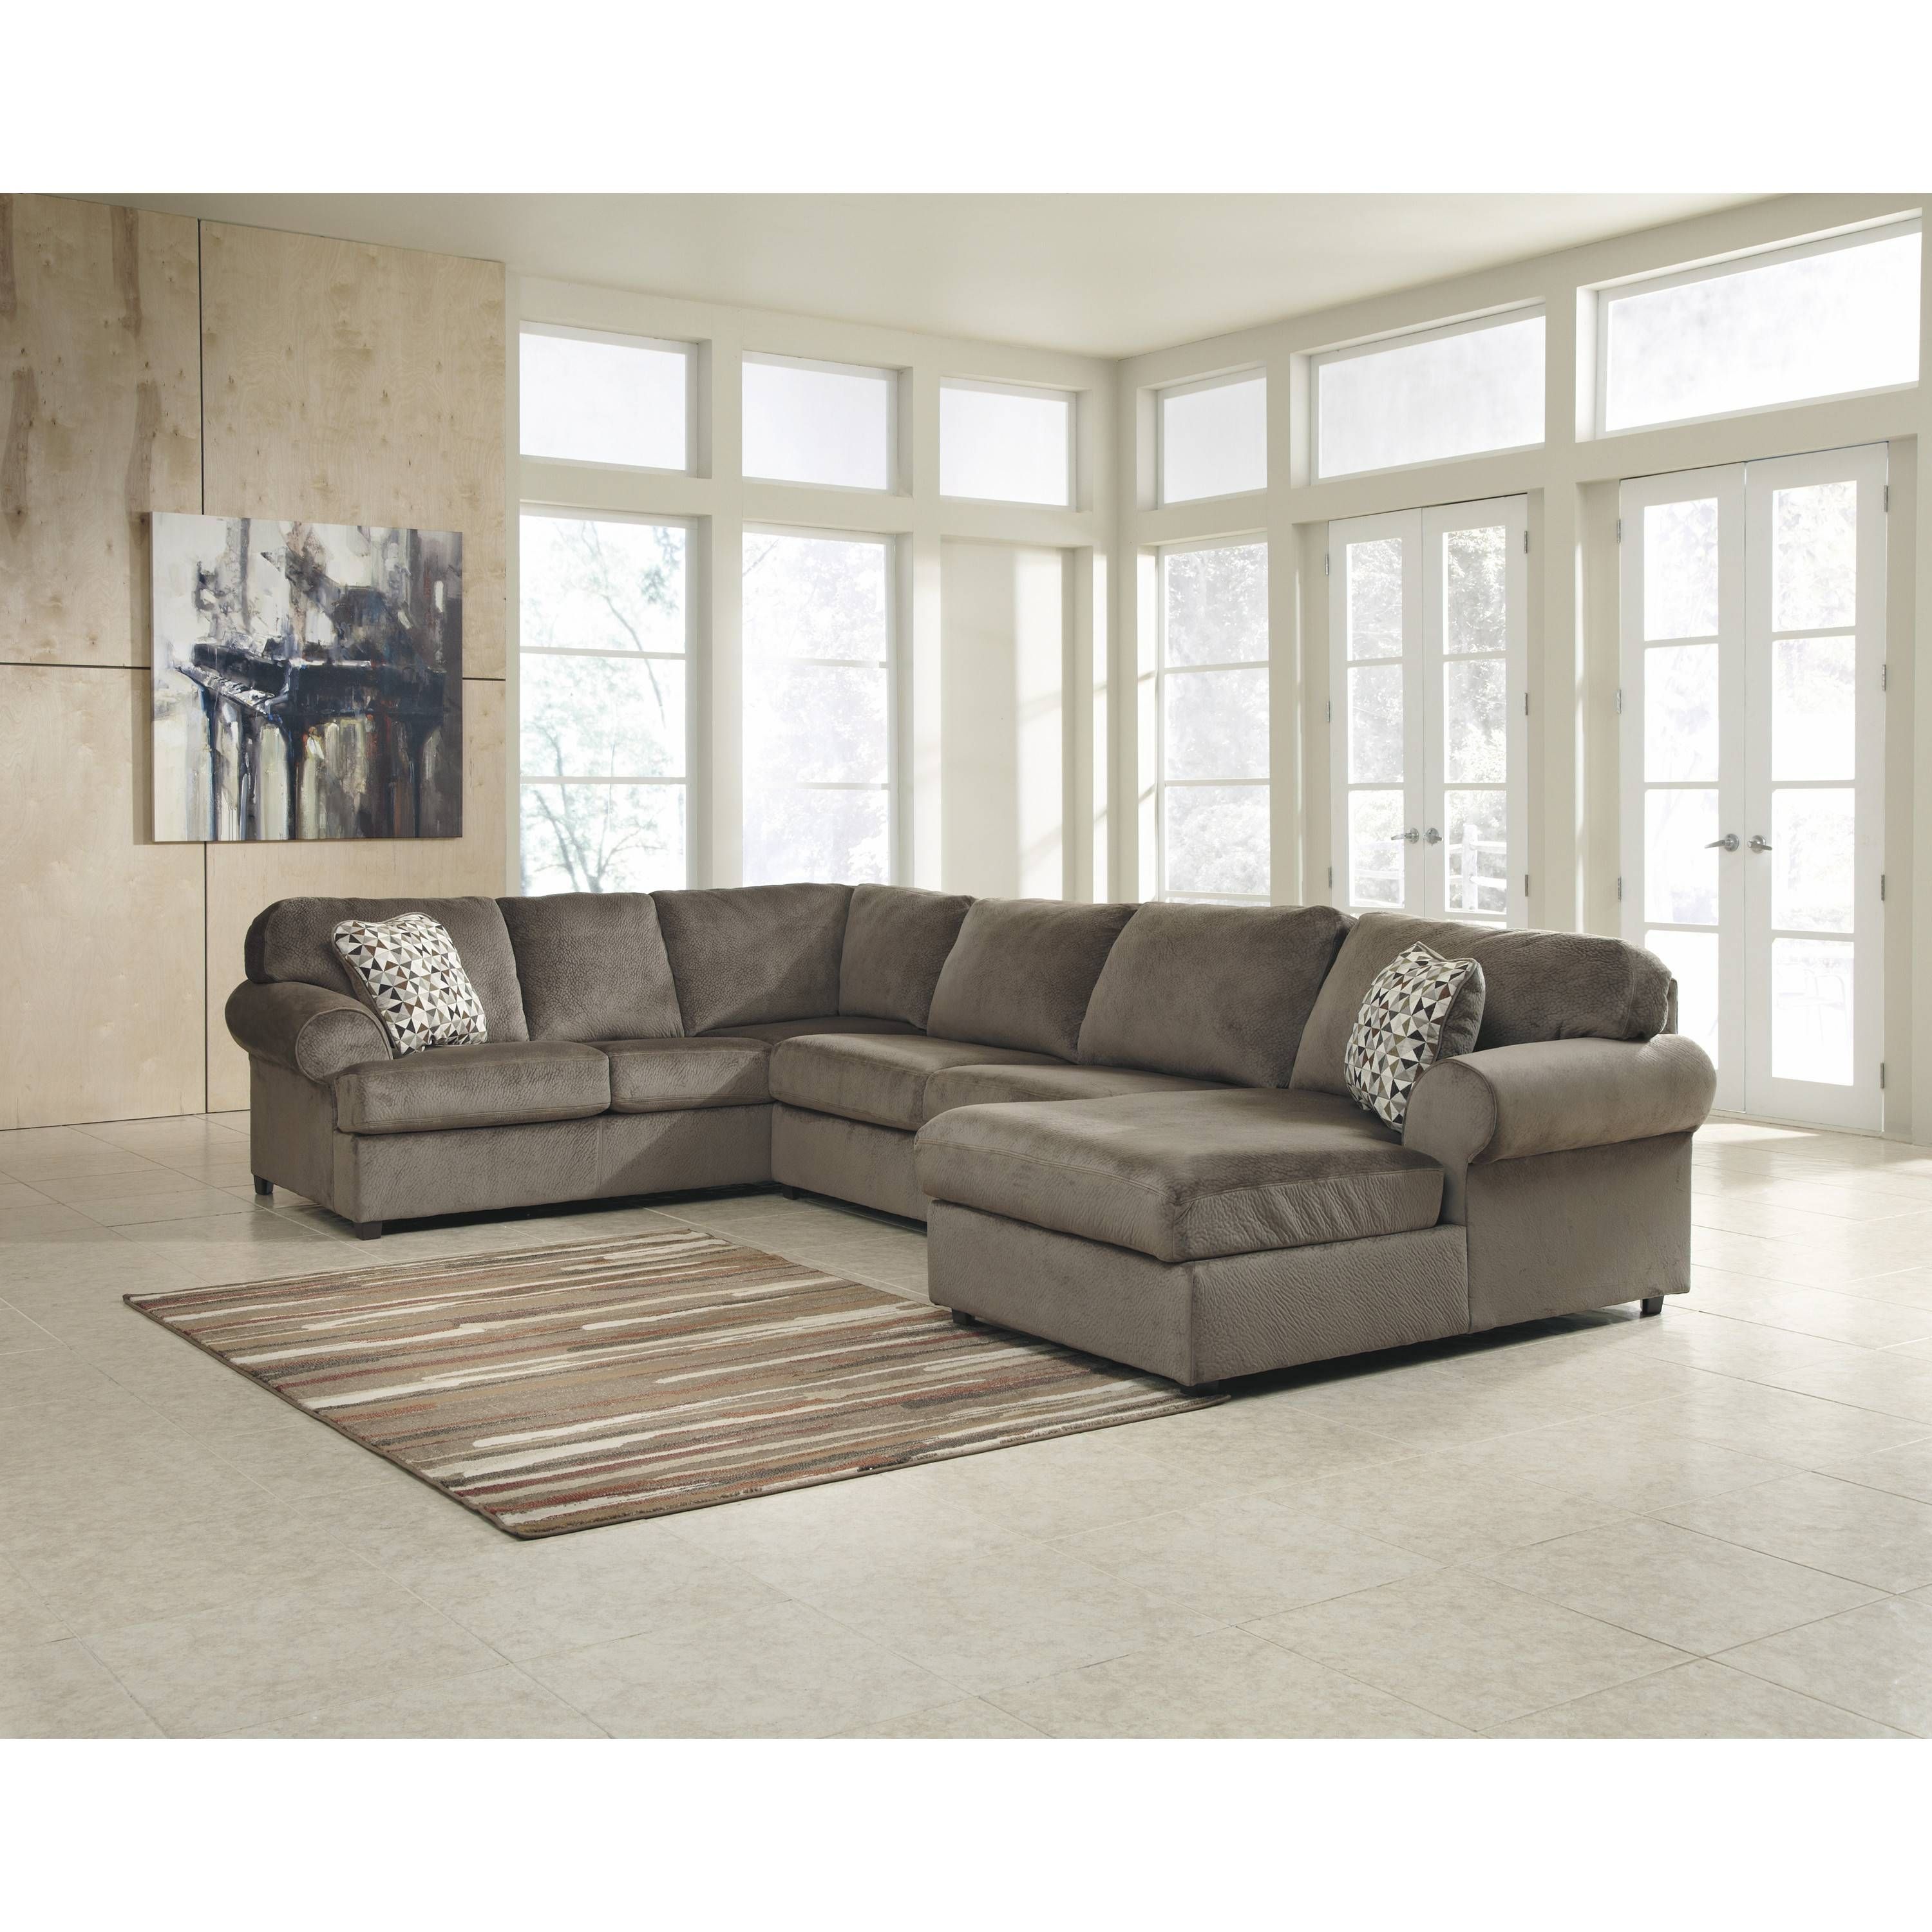 Popular C Shaped Sofa Sectional 36 For Your Build Your Own With C Shaped Sofa (Photo 26 of 30)